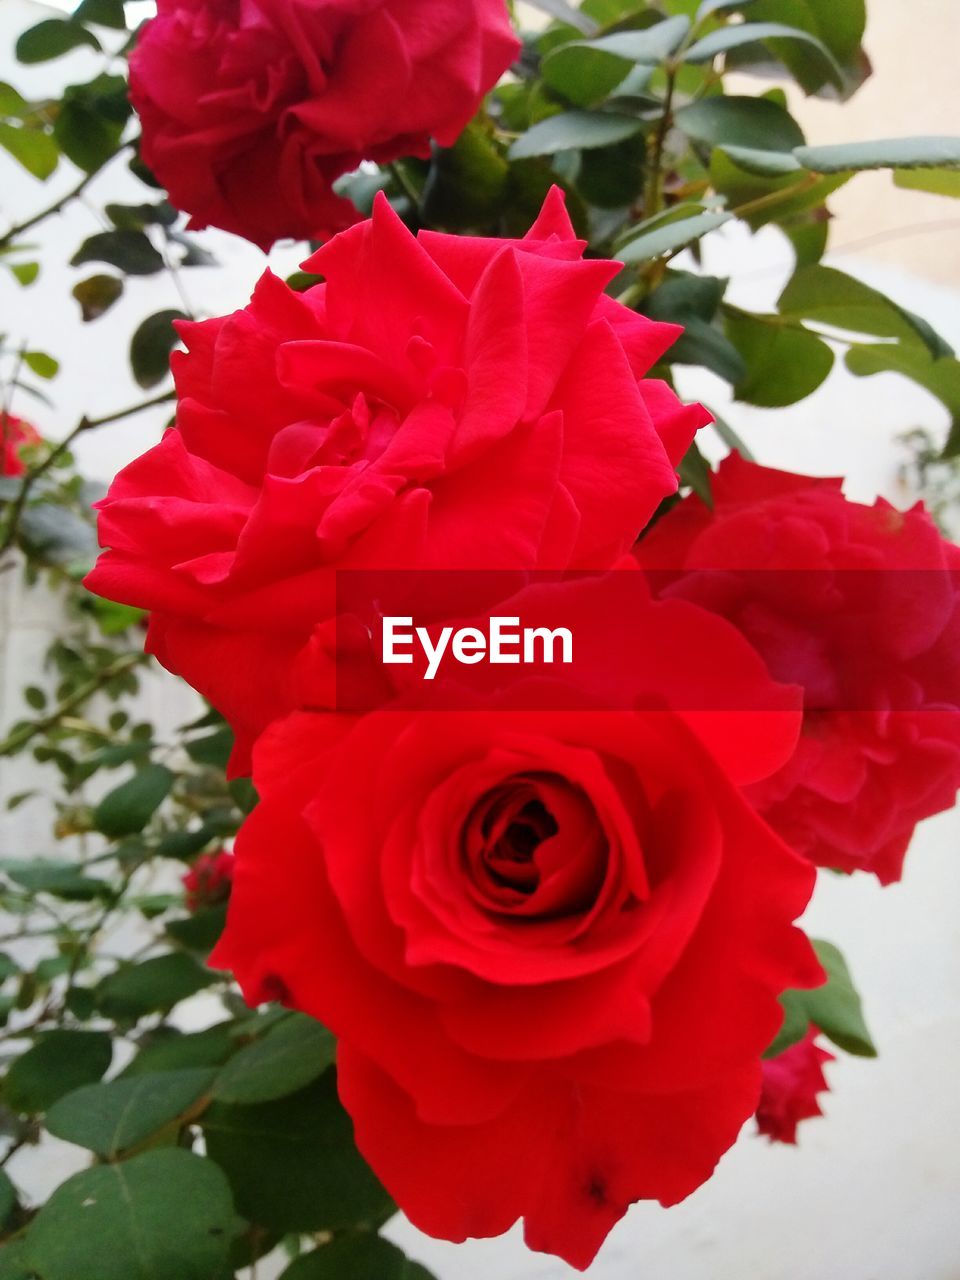 CLOSE-UP OF RED ROSE AGAINST ROSES